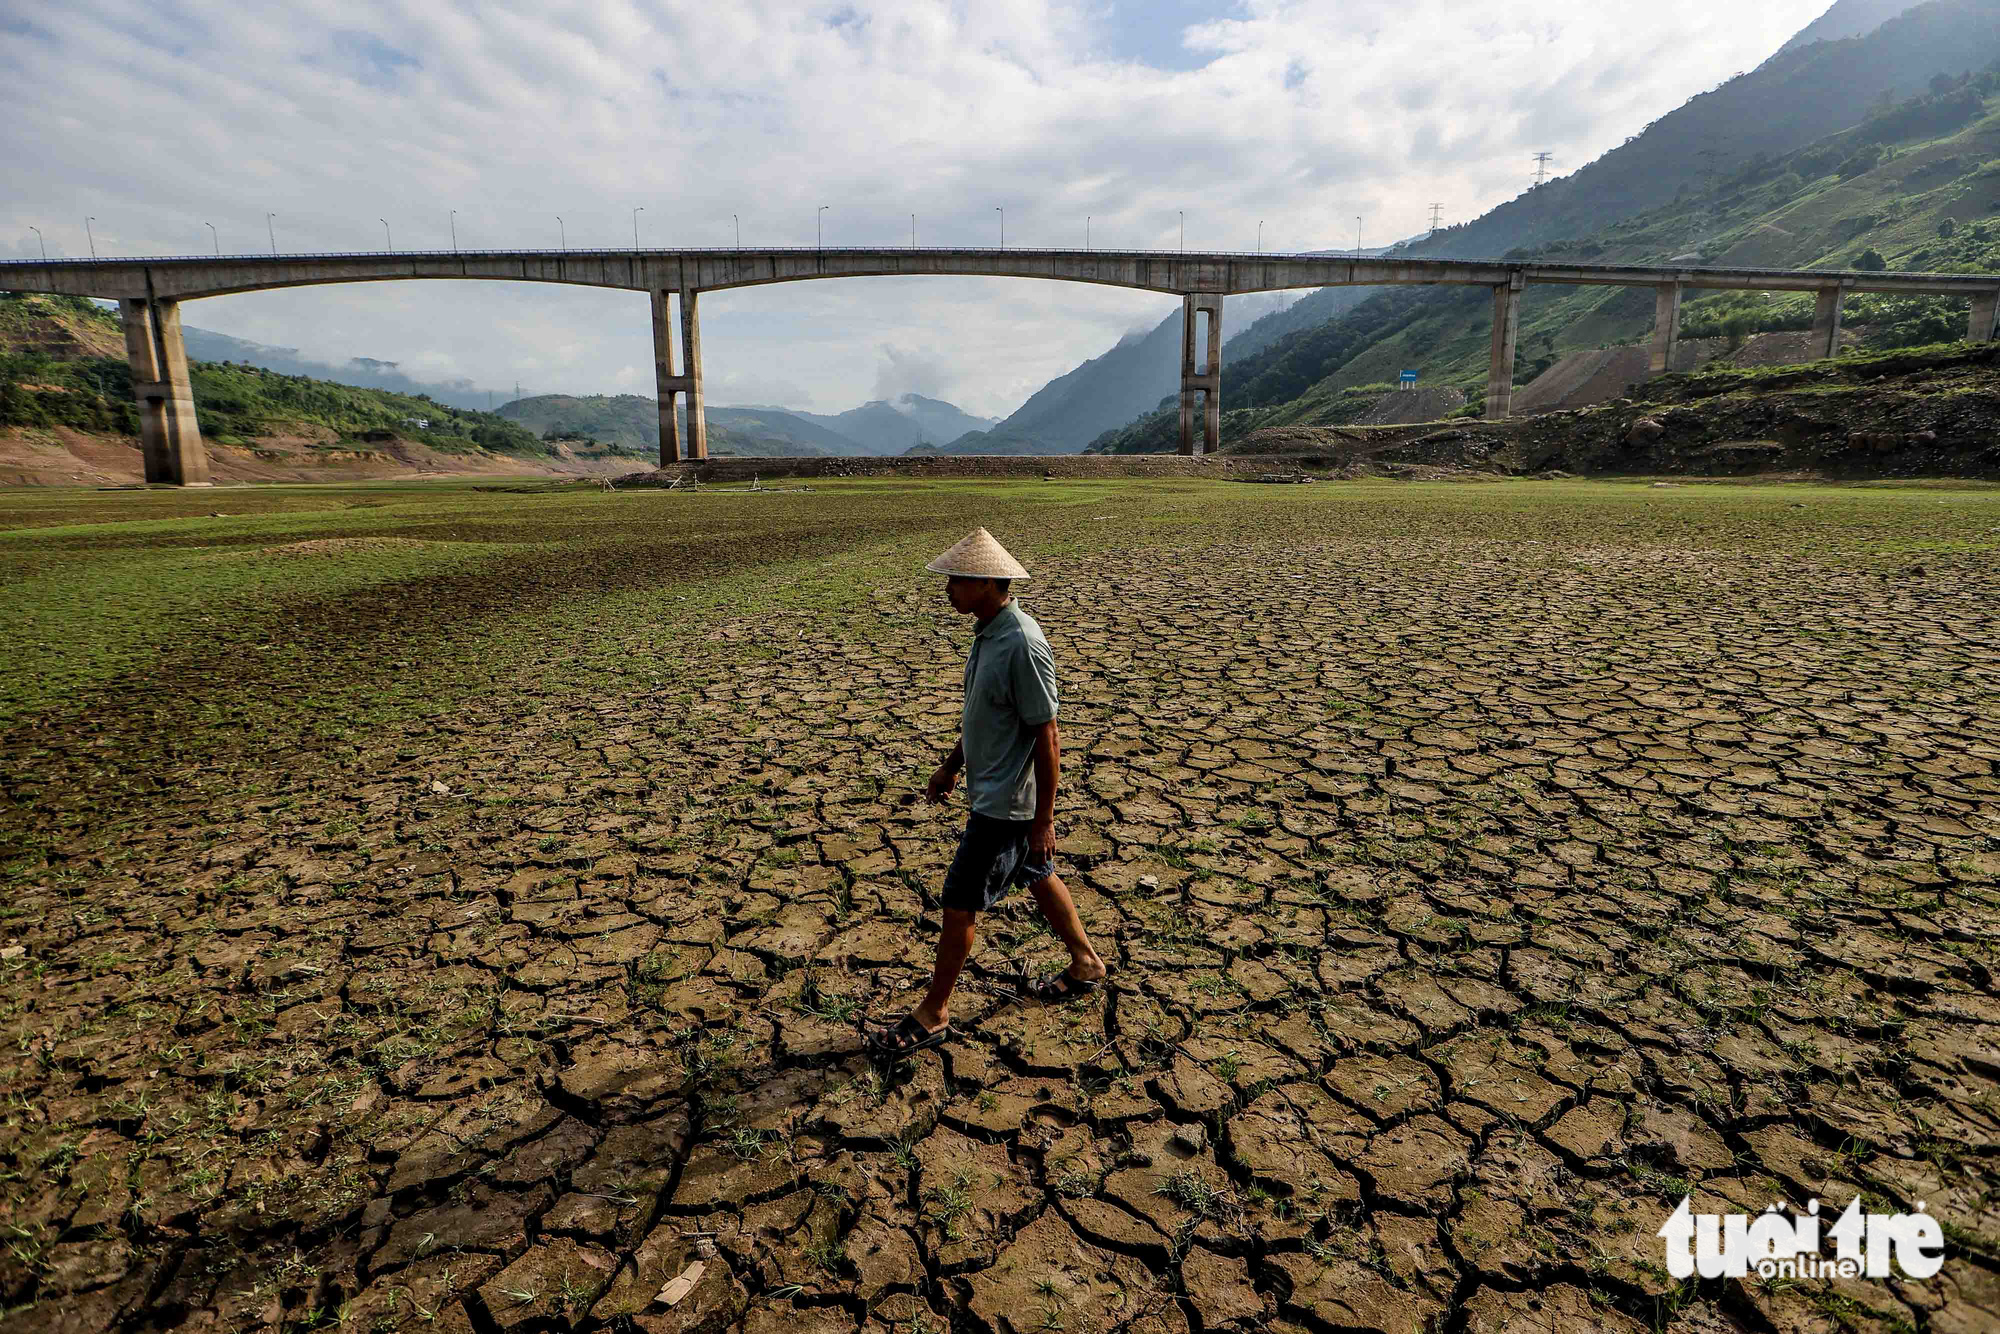 Prolonged drought takes heavy toll on Vietnam’s largest hydropower reservoir